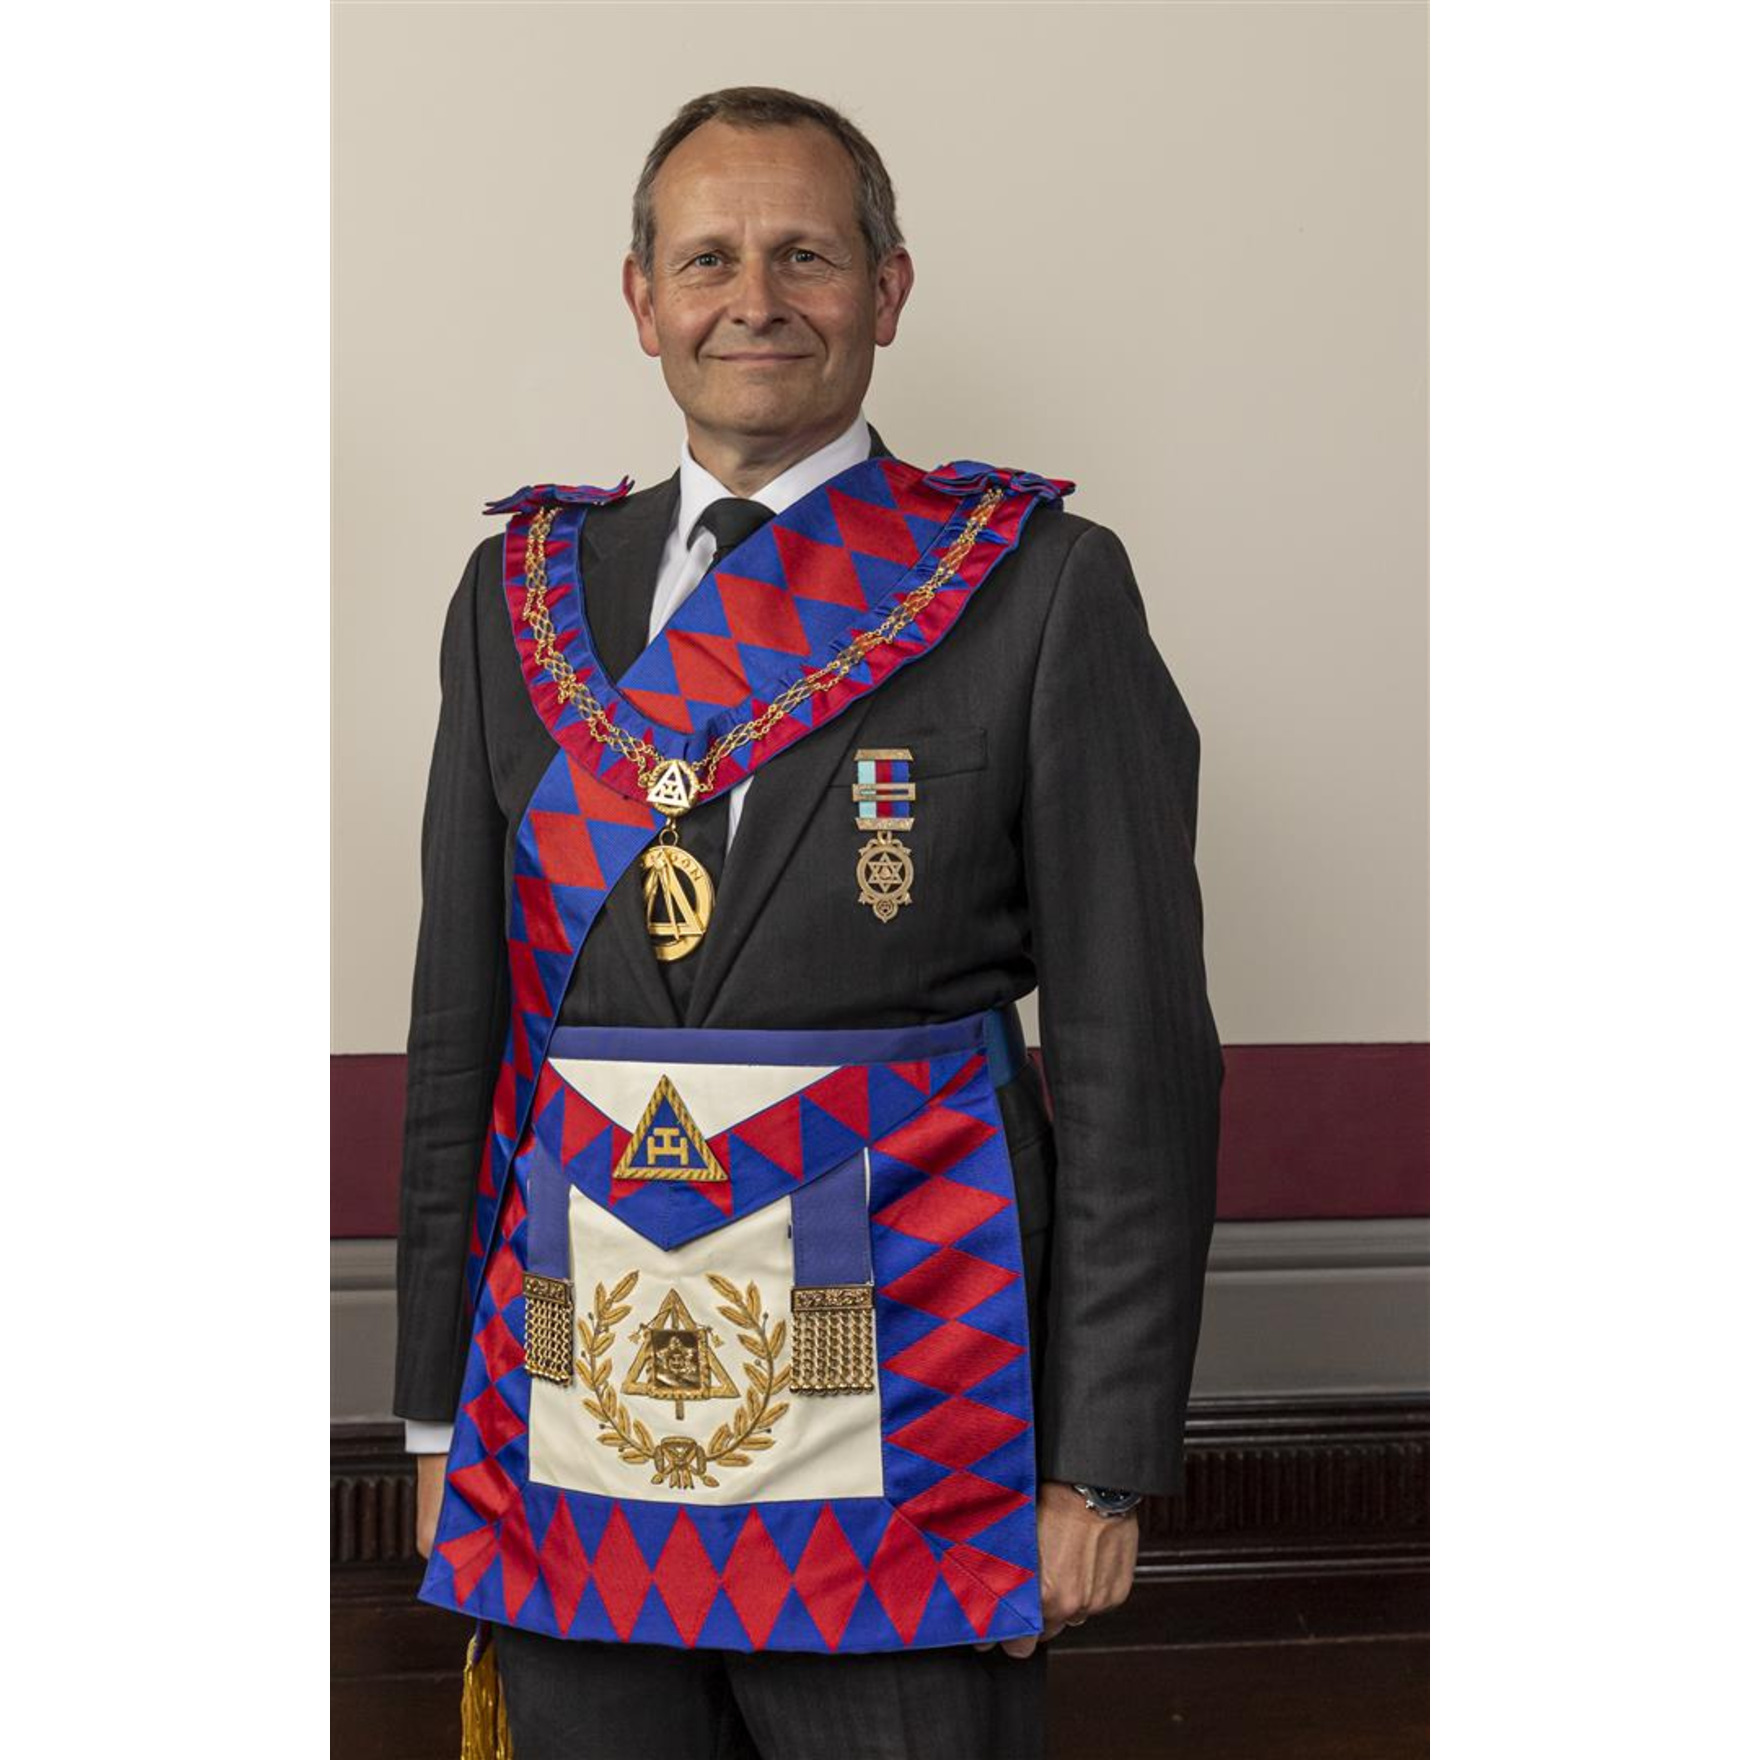 Why Master Masons (and above) should join the Royal Arch